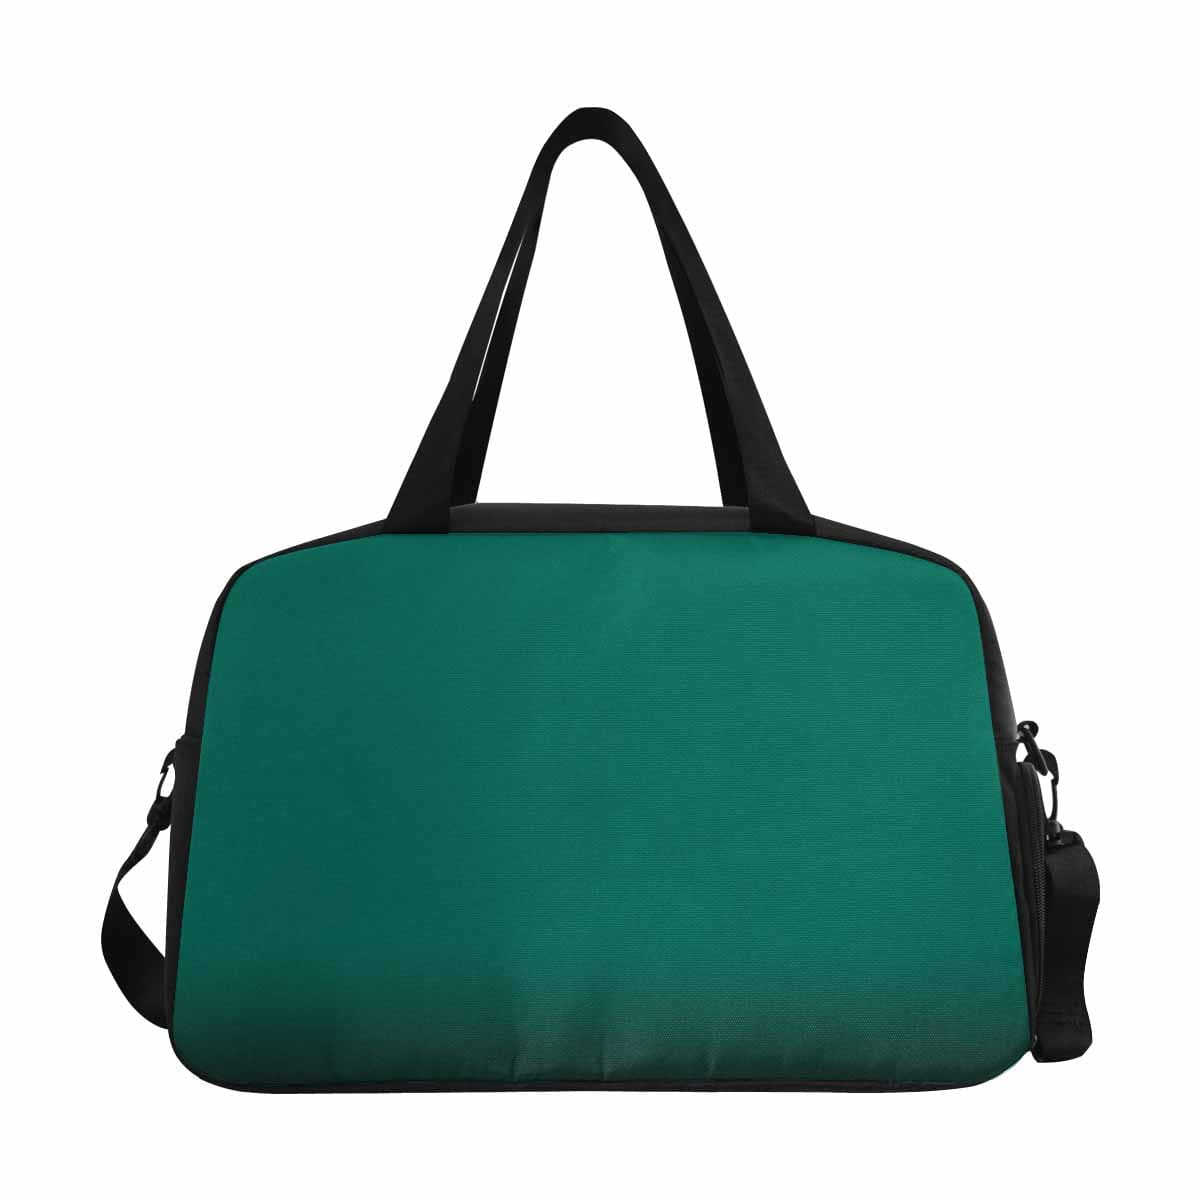 Teal Green Tote And Crossbody Travel Bag - Bags | Travel Bags | Crossbody